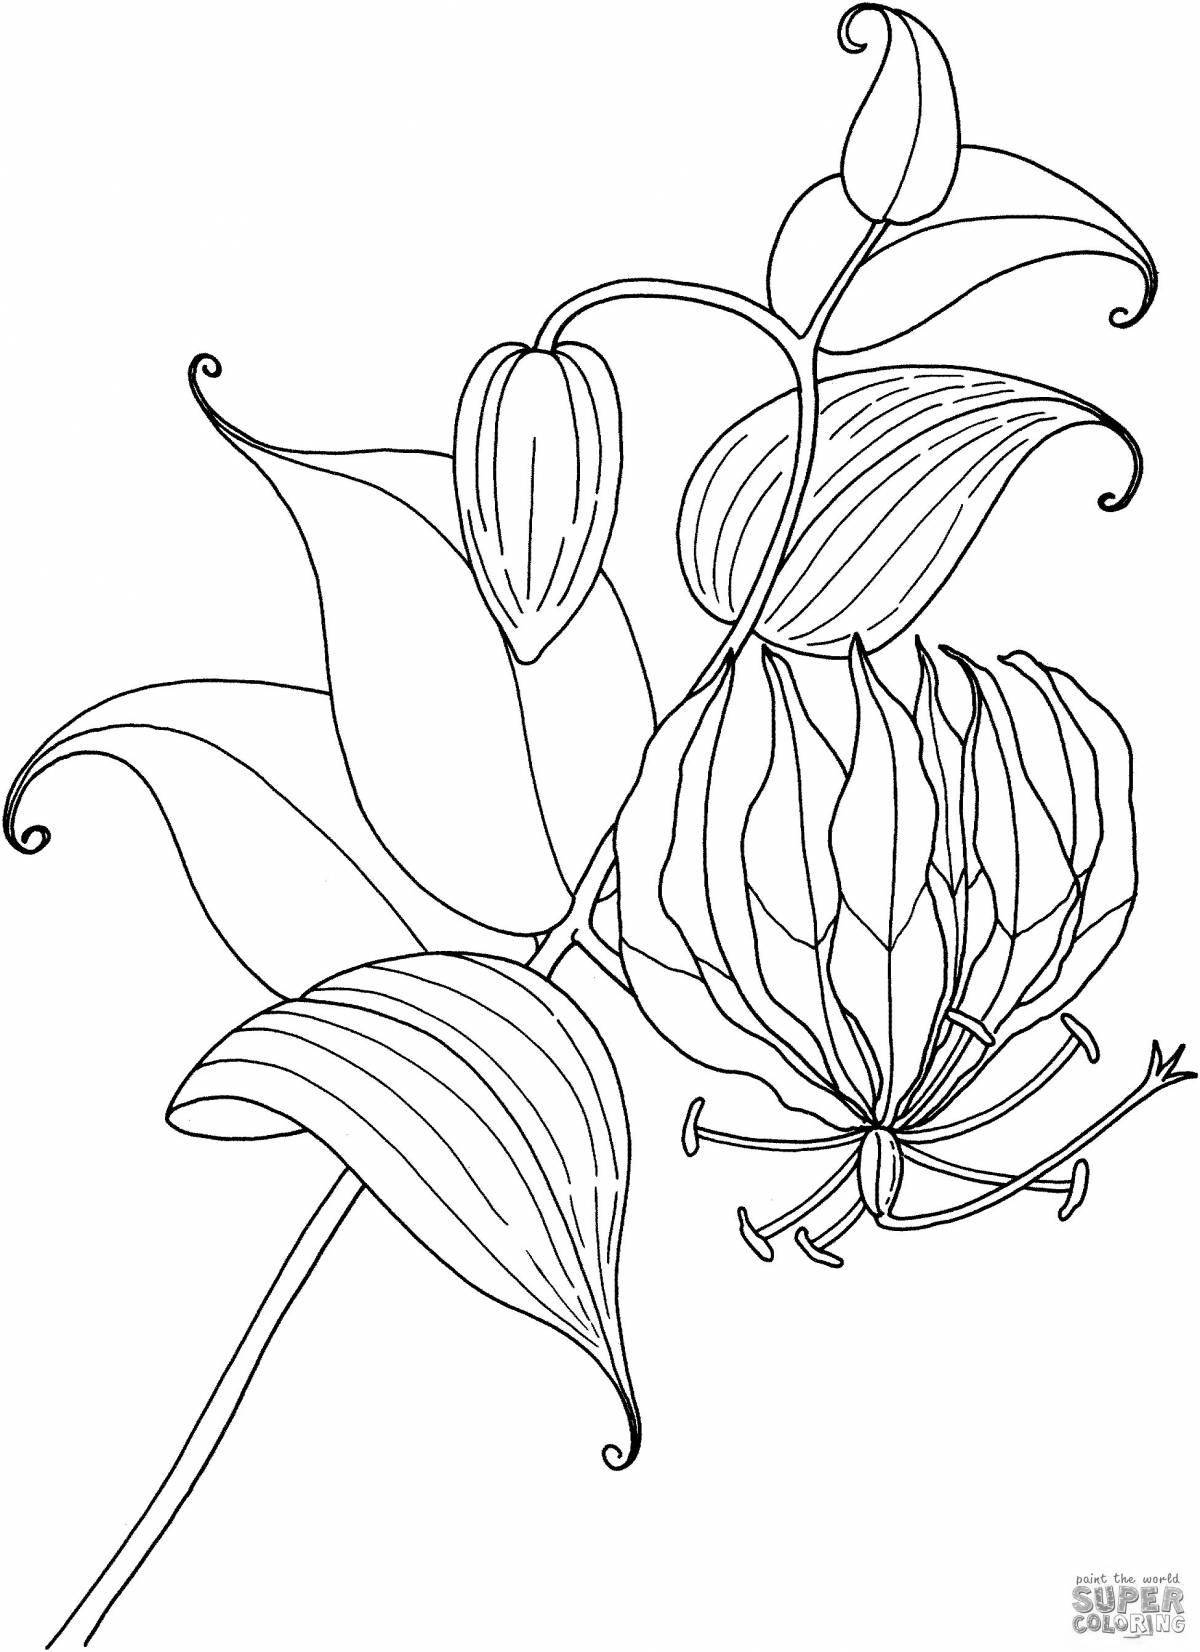 Awesome sea lily coloring page